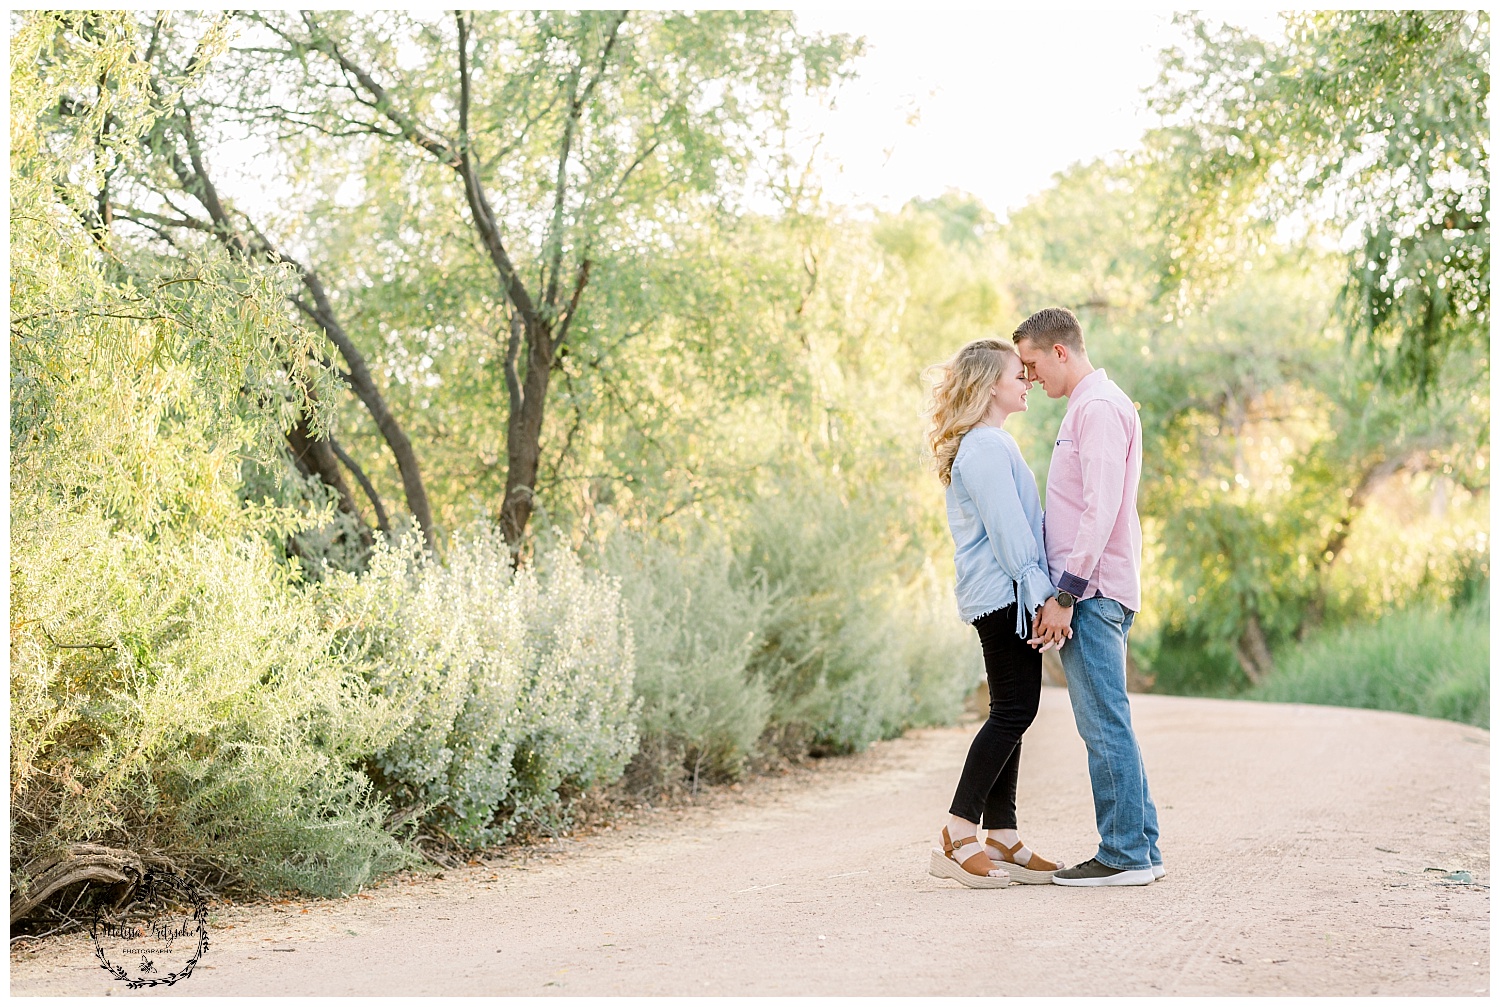 What to wear to your enggement session. Chambray top and pink button down. Engagement session in Tucson, Arizona at sweet water wetlands park by Tucson Wedding Photographer Melissa Fritzsche Photography.